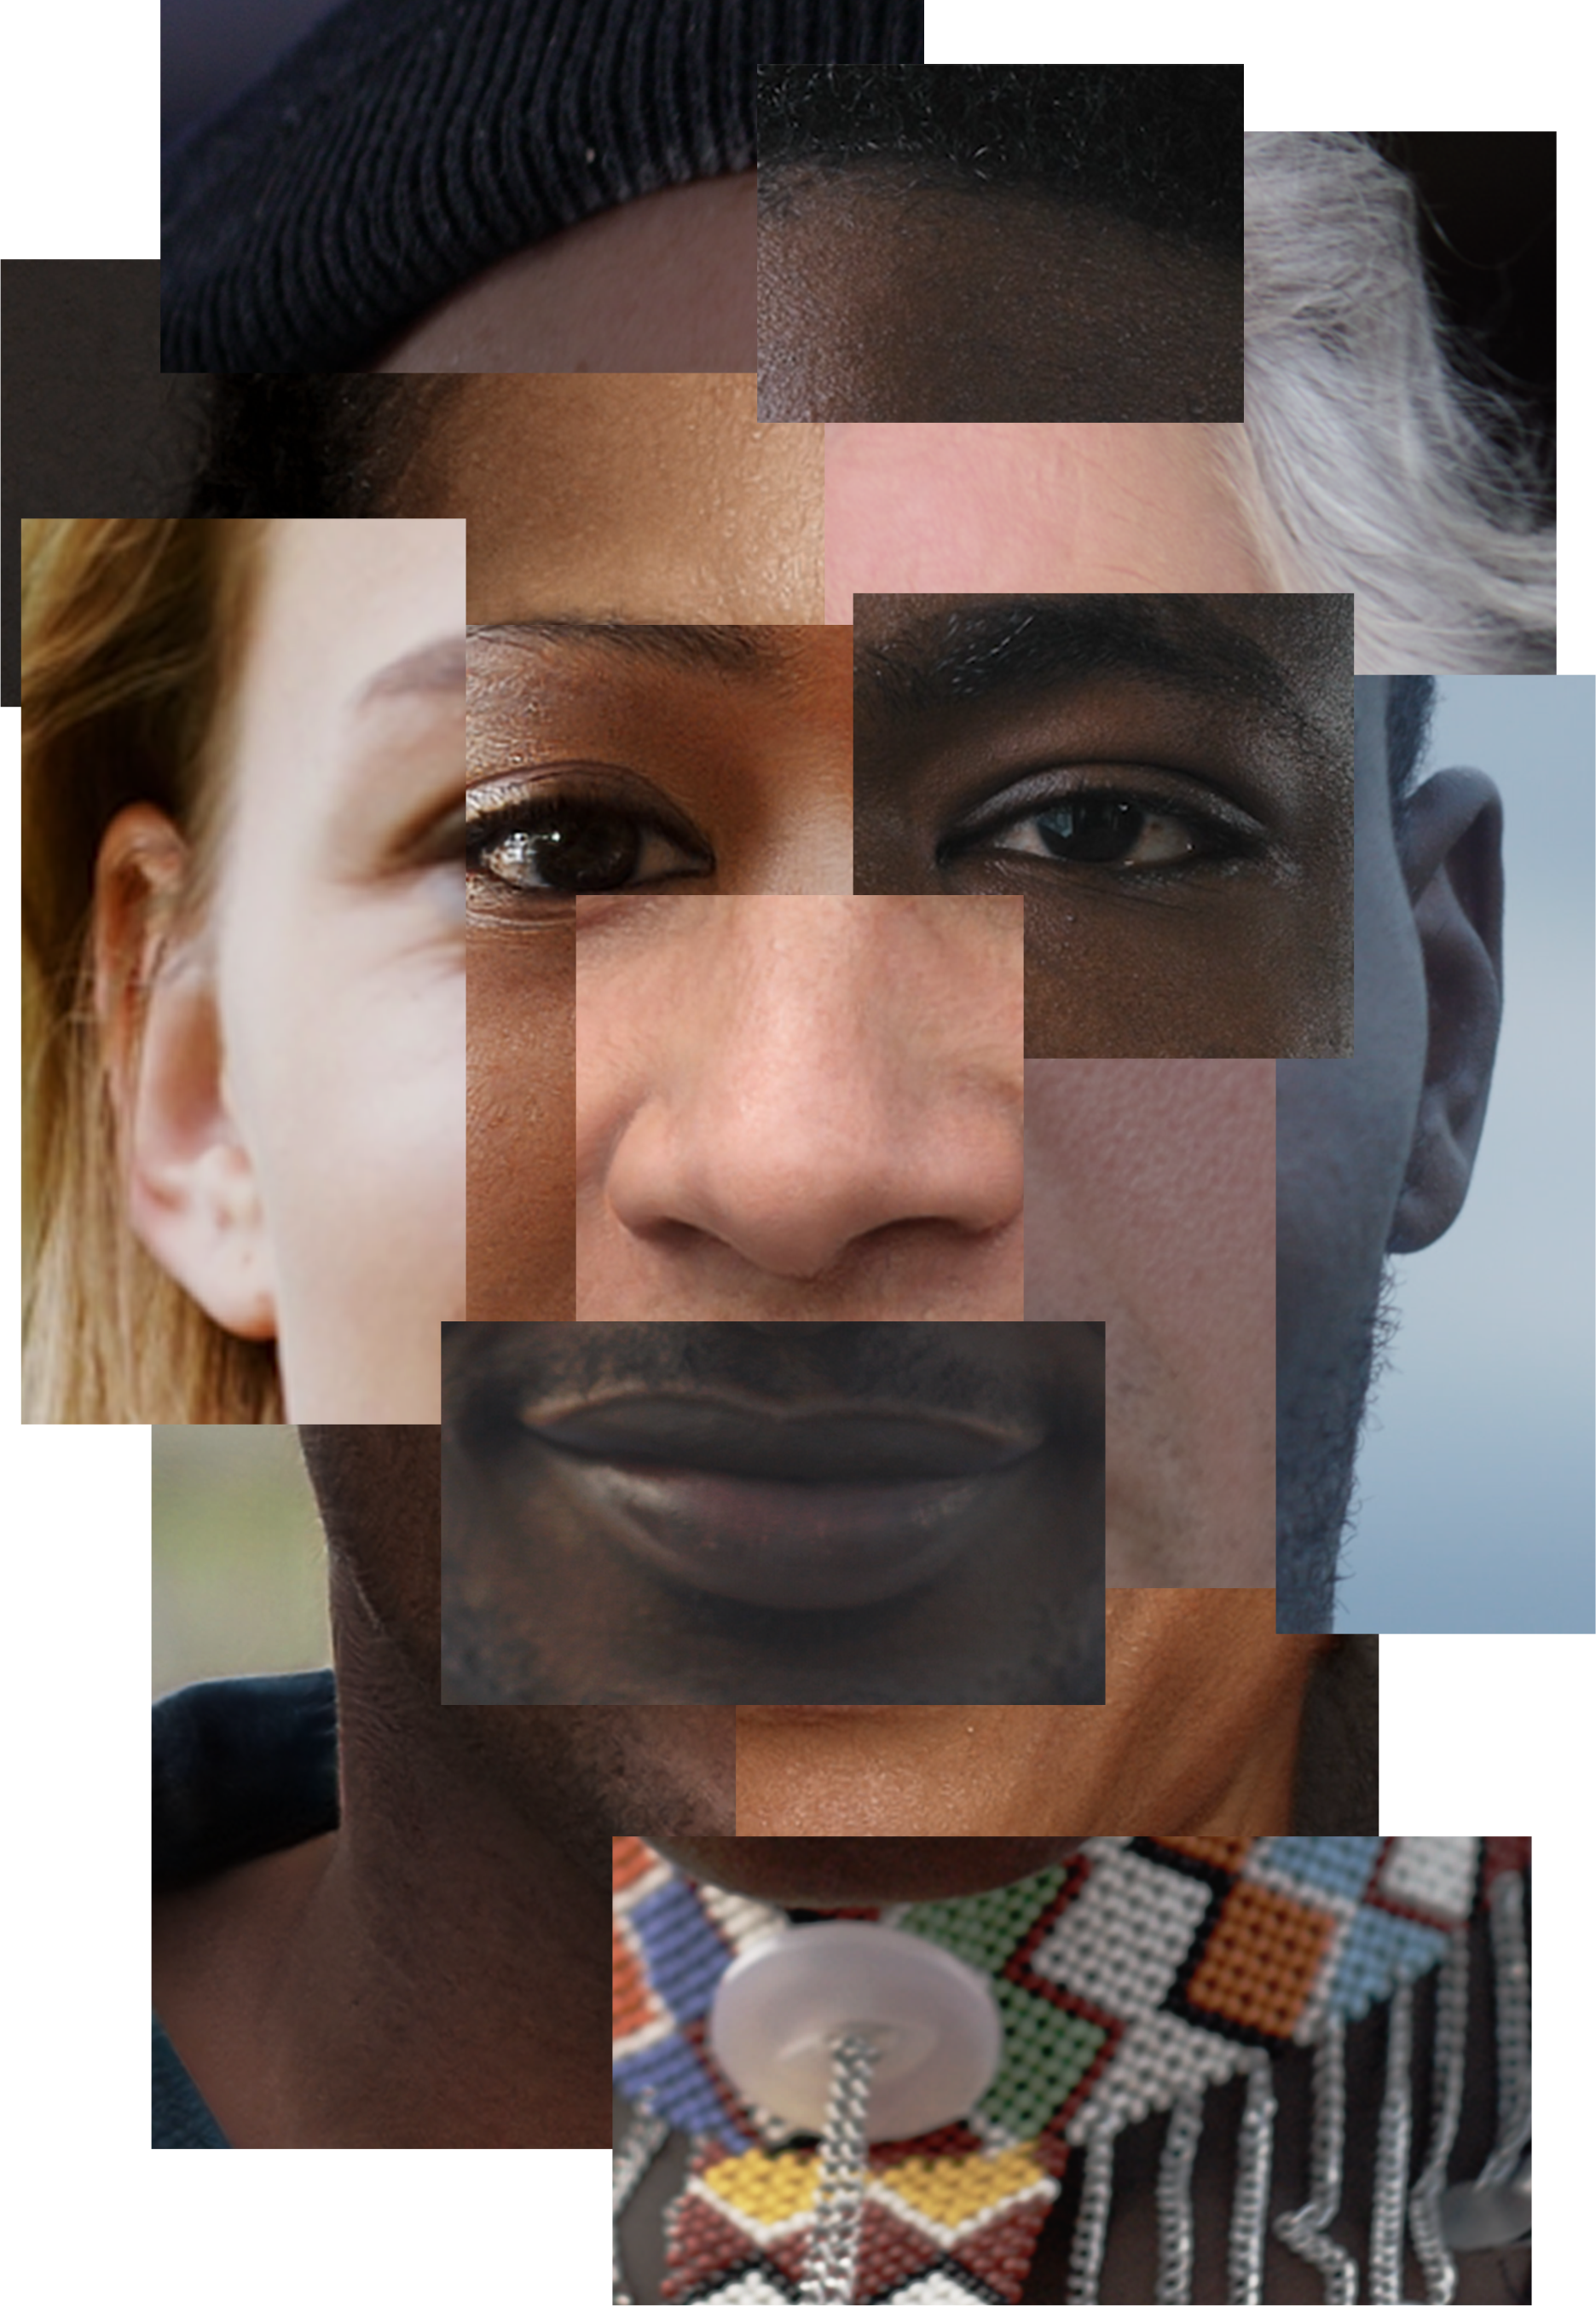 Key visual showing a face constructed by many people of different ethnicities